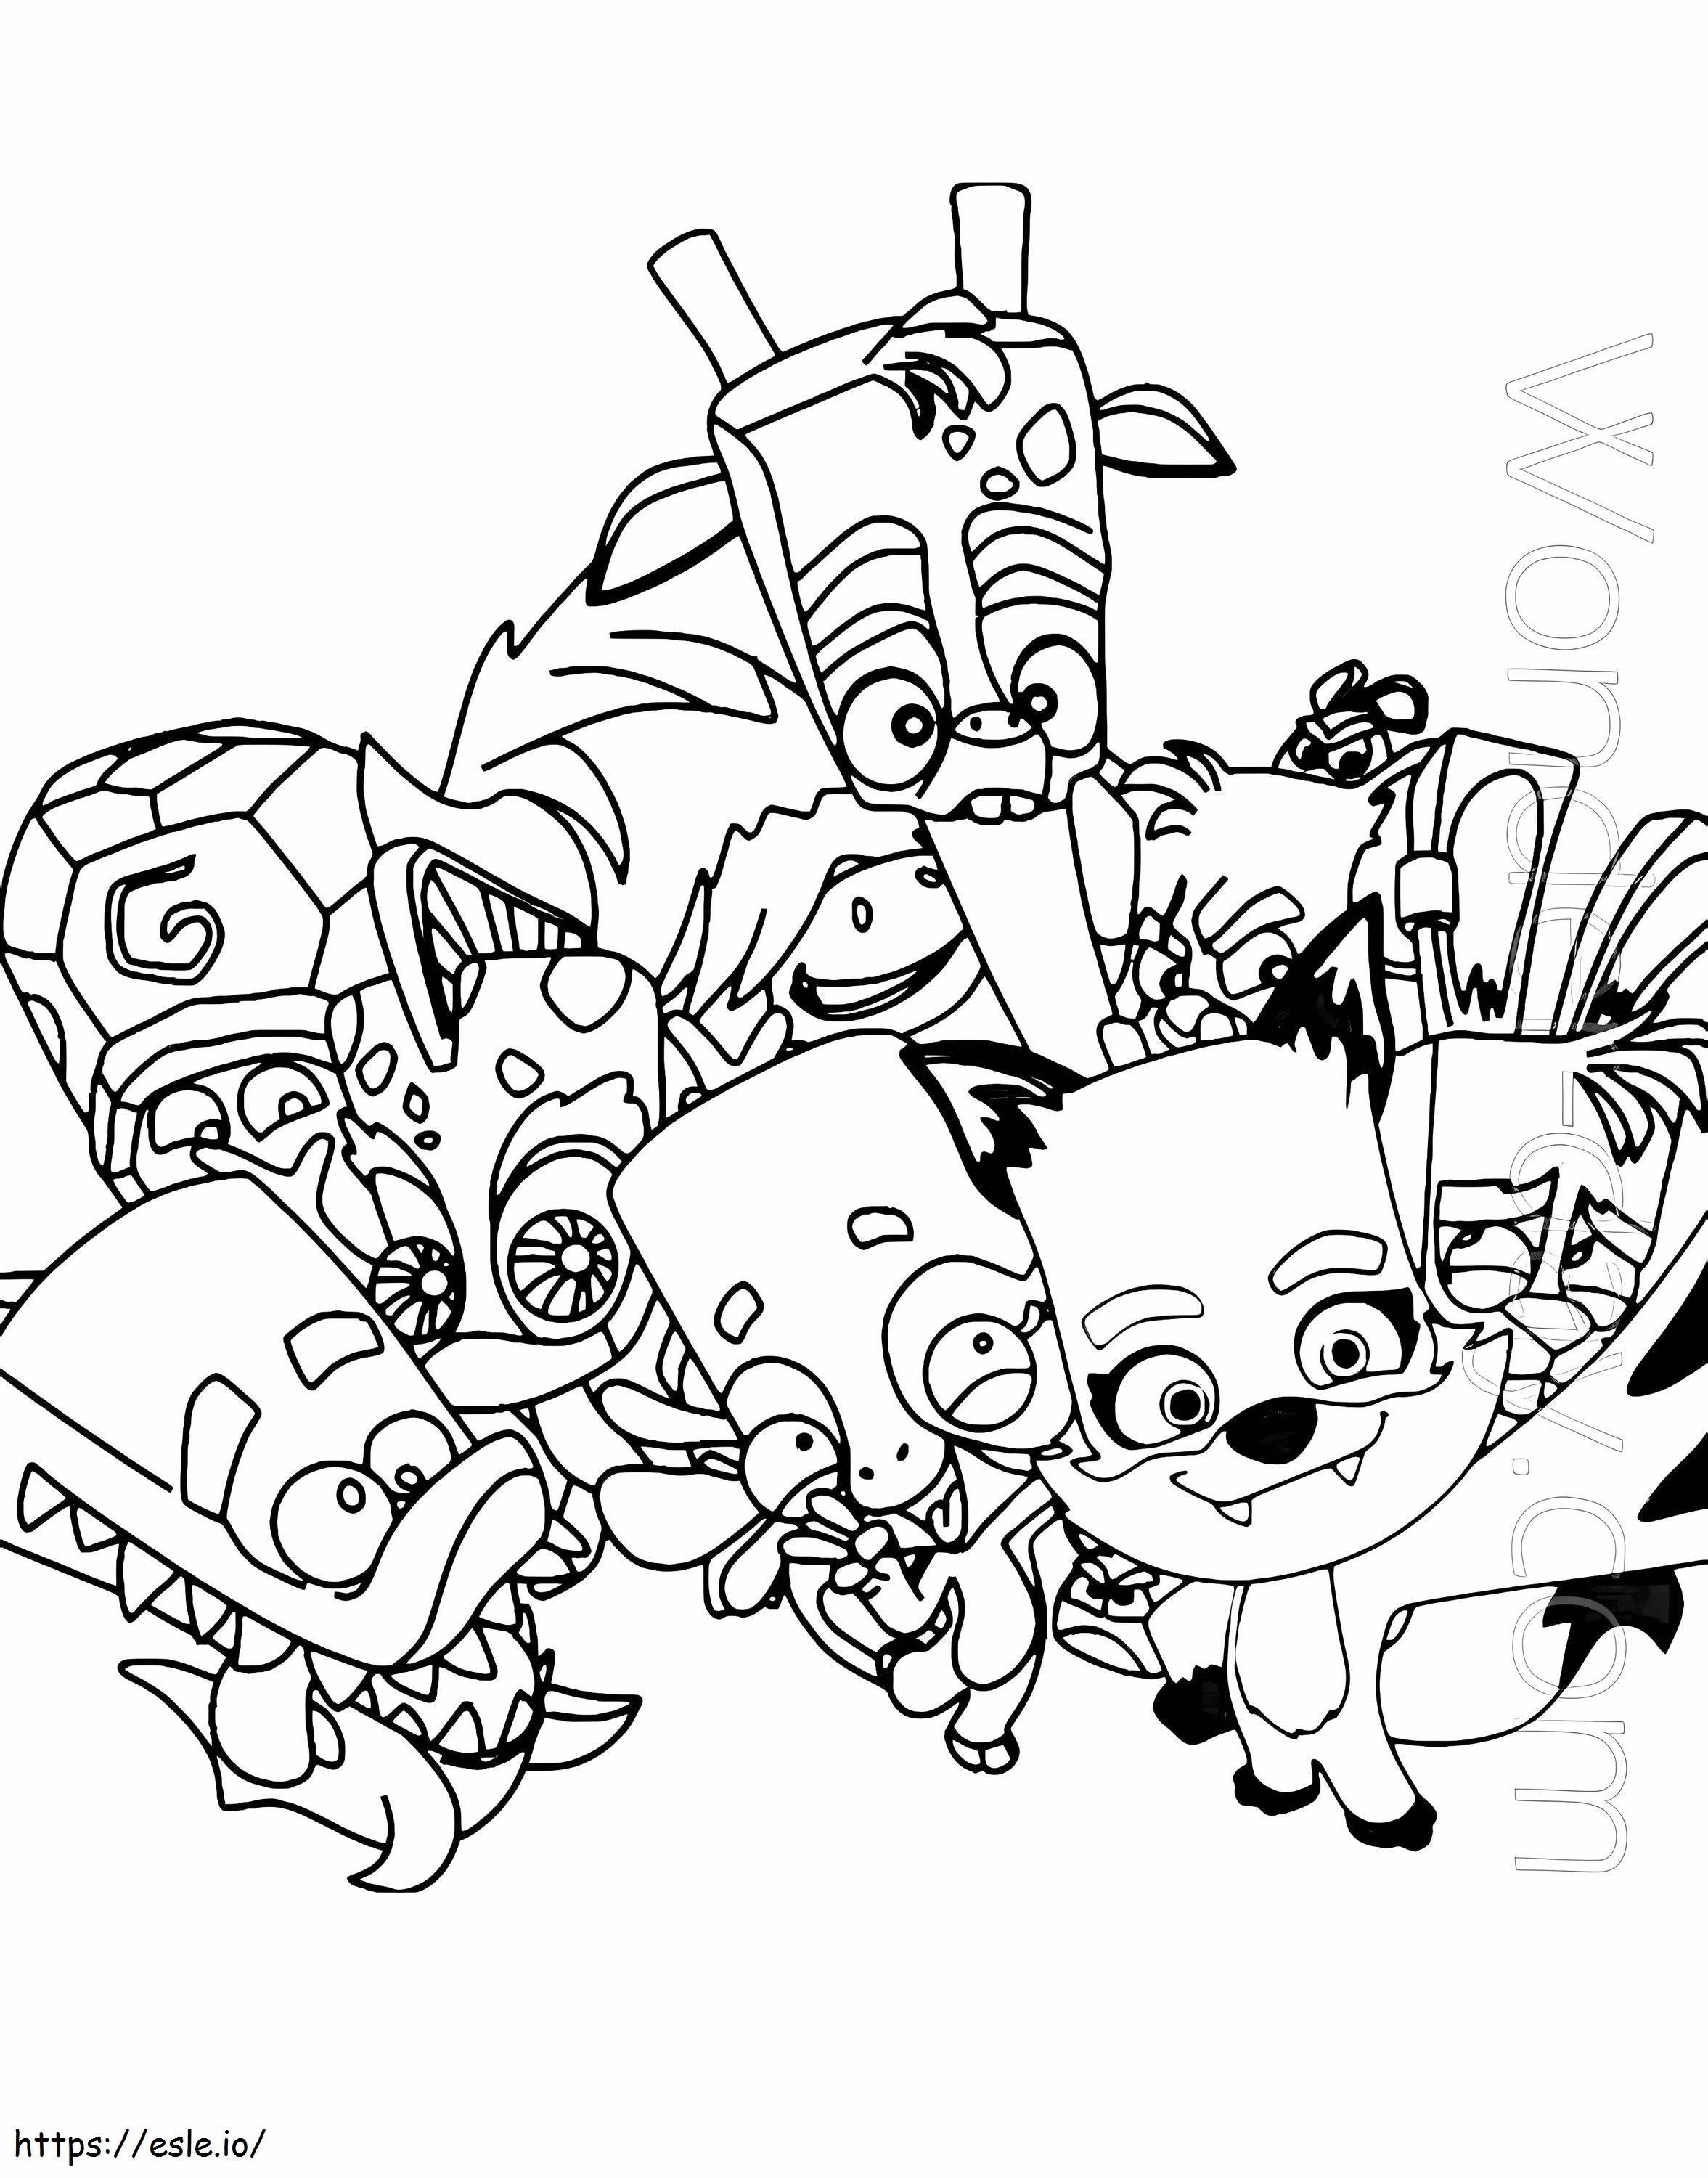 Zooba Game coloring page